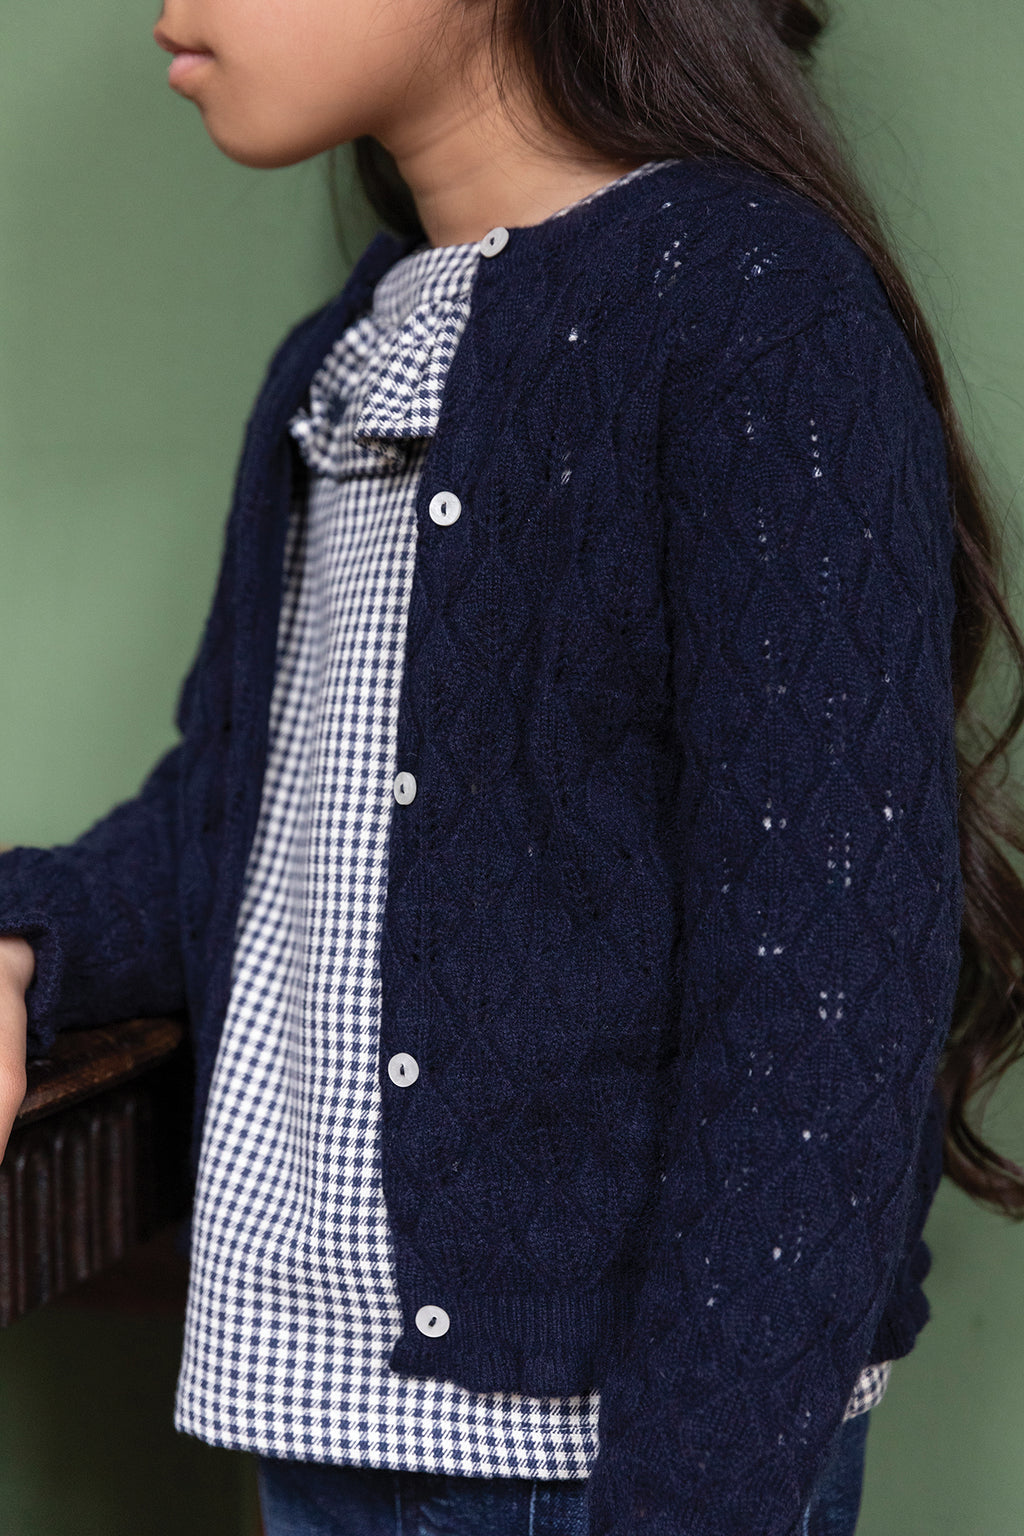 Cardigan - Navy knit leaves